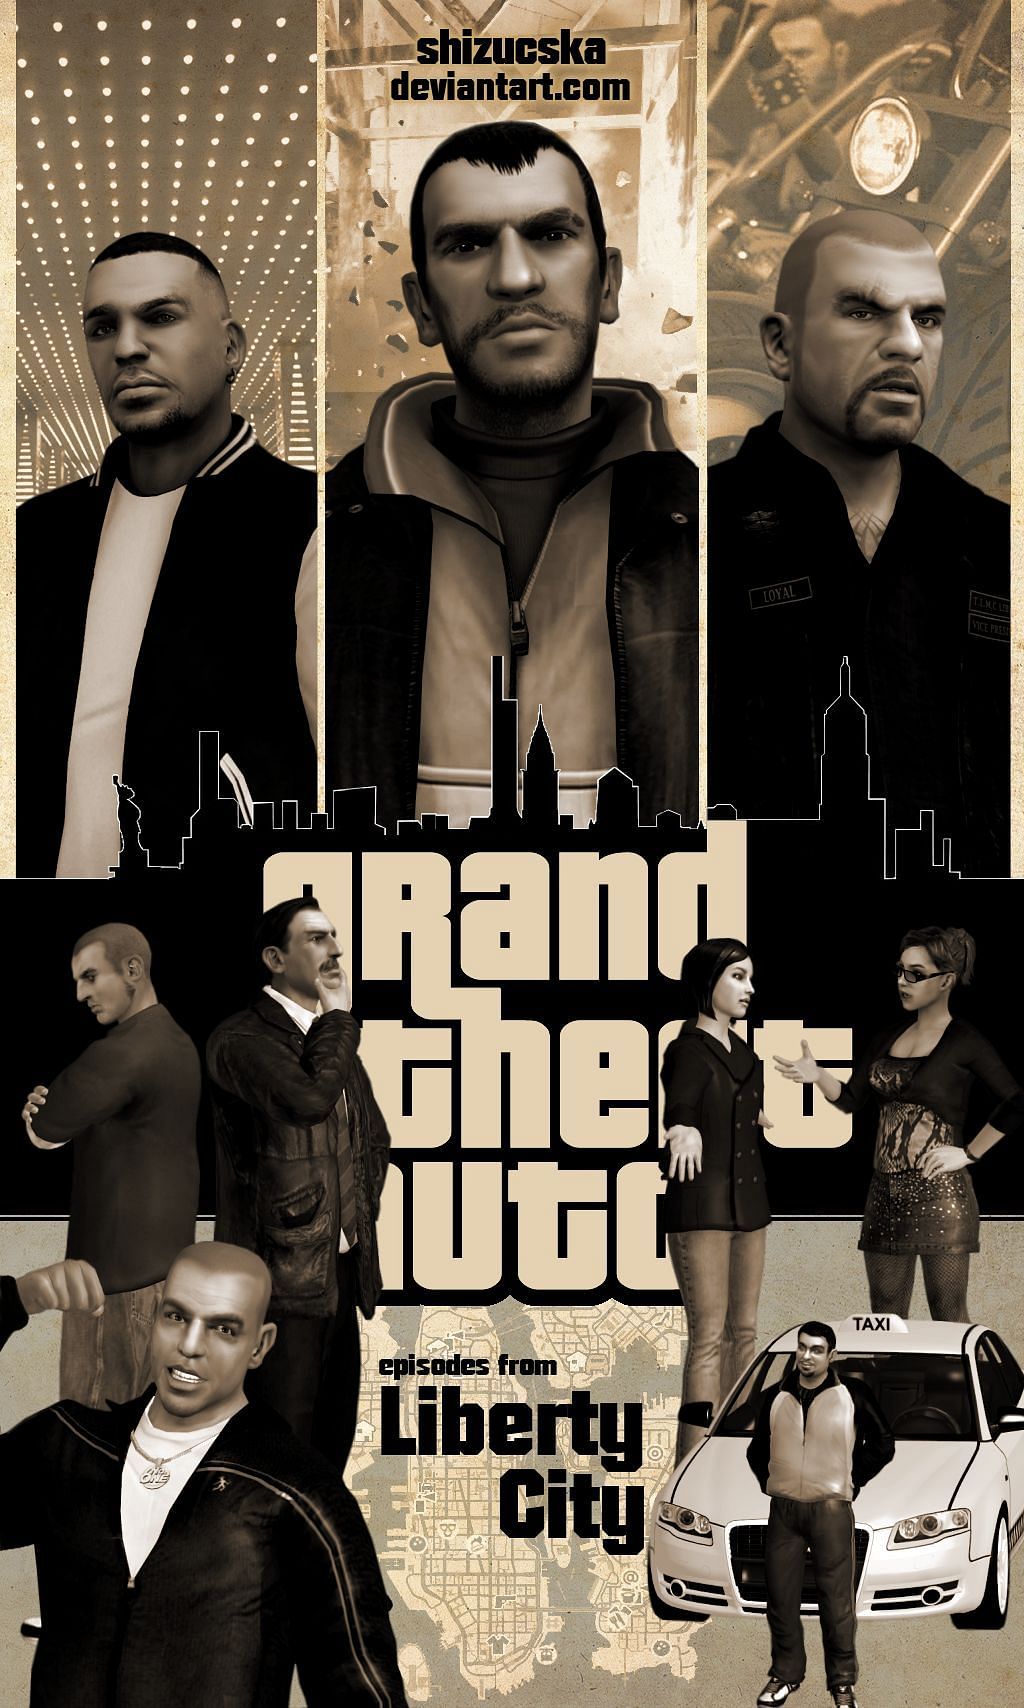 GTA 4 had an episodic style and it was very popular (Image via DeviantArt)